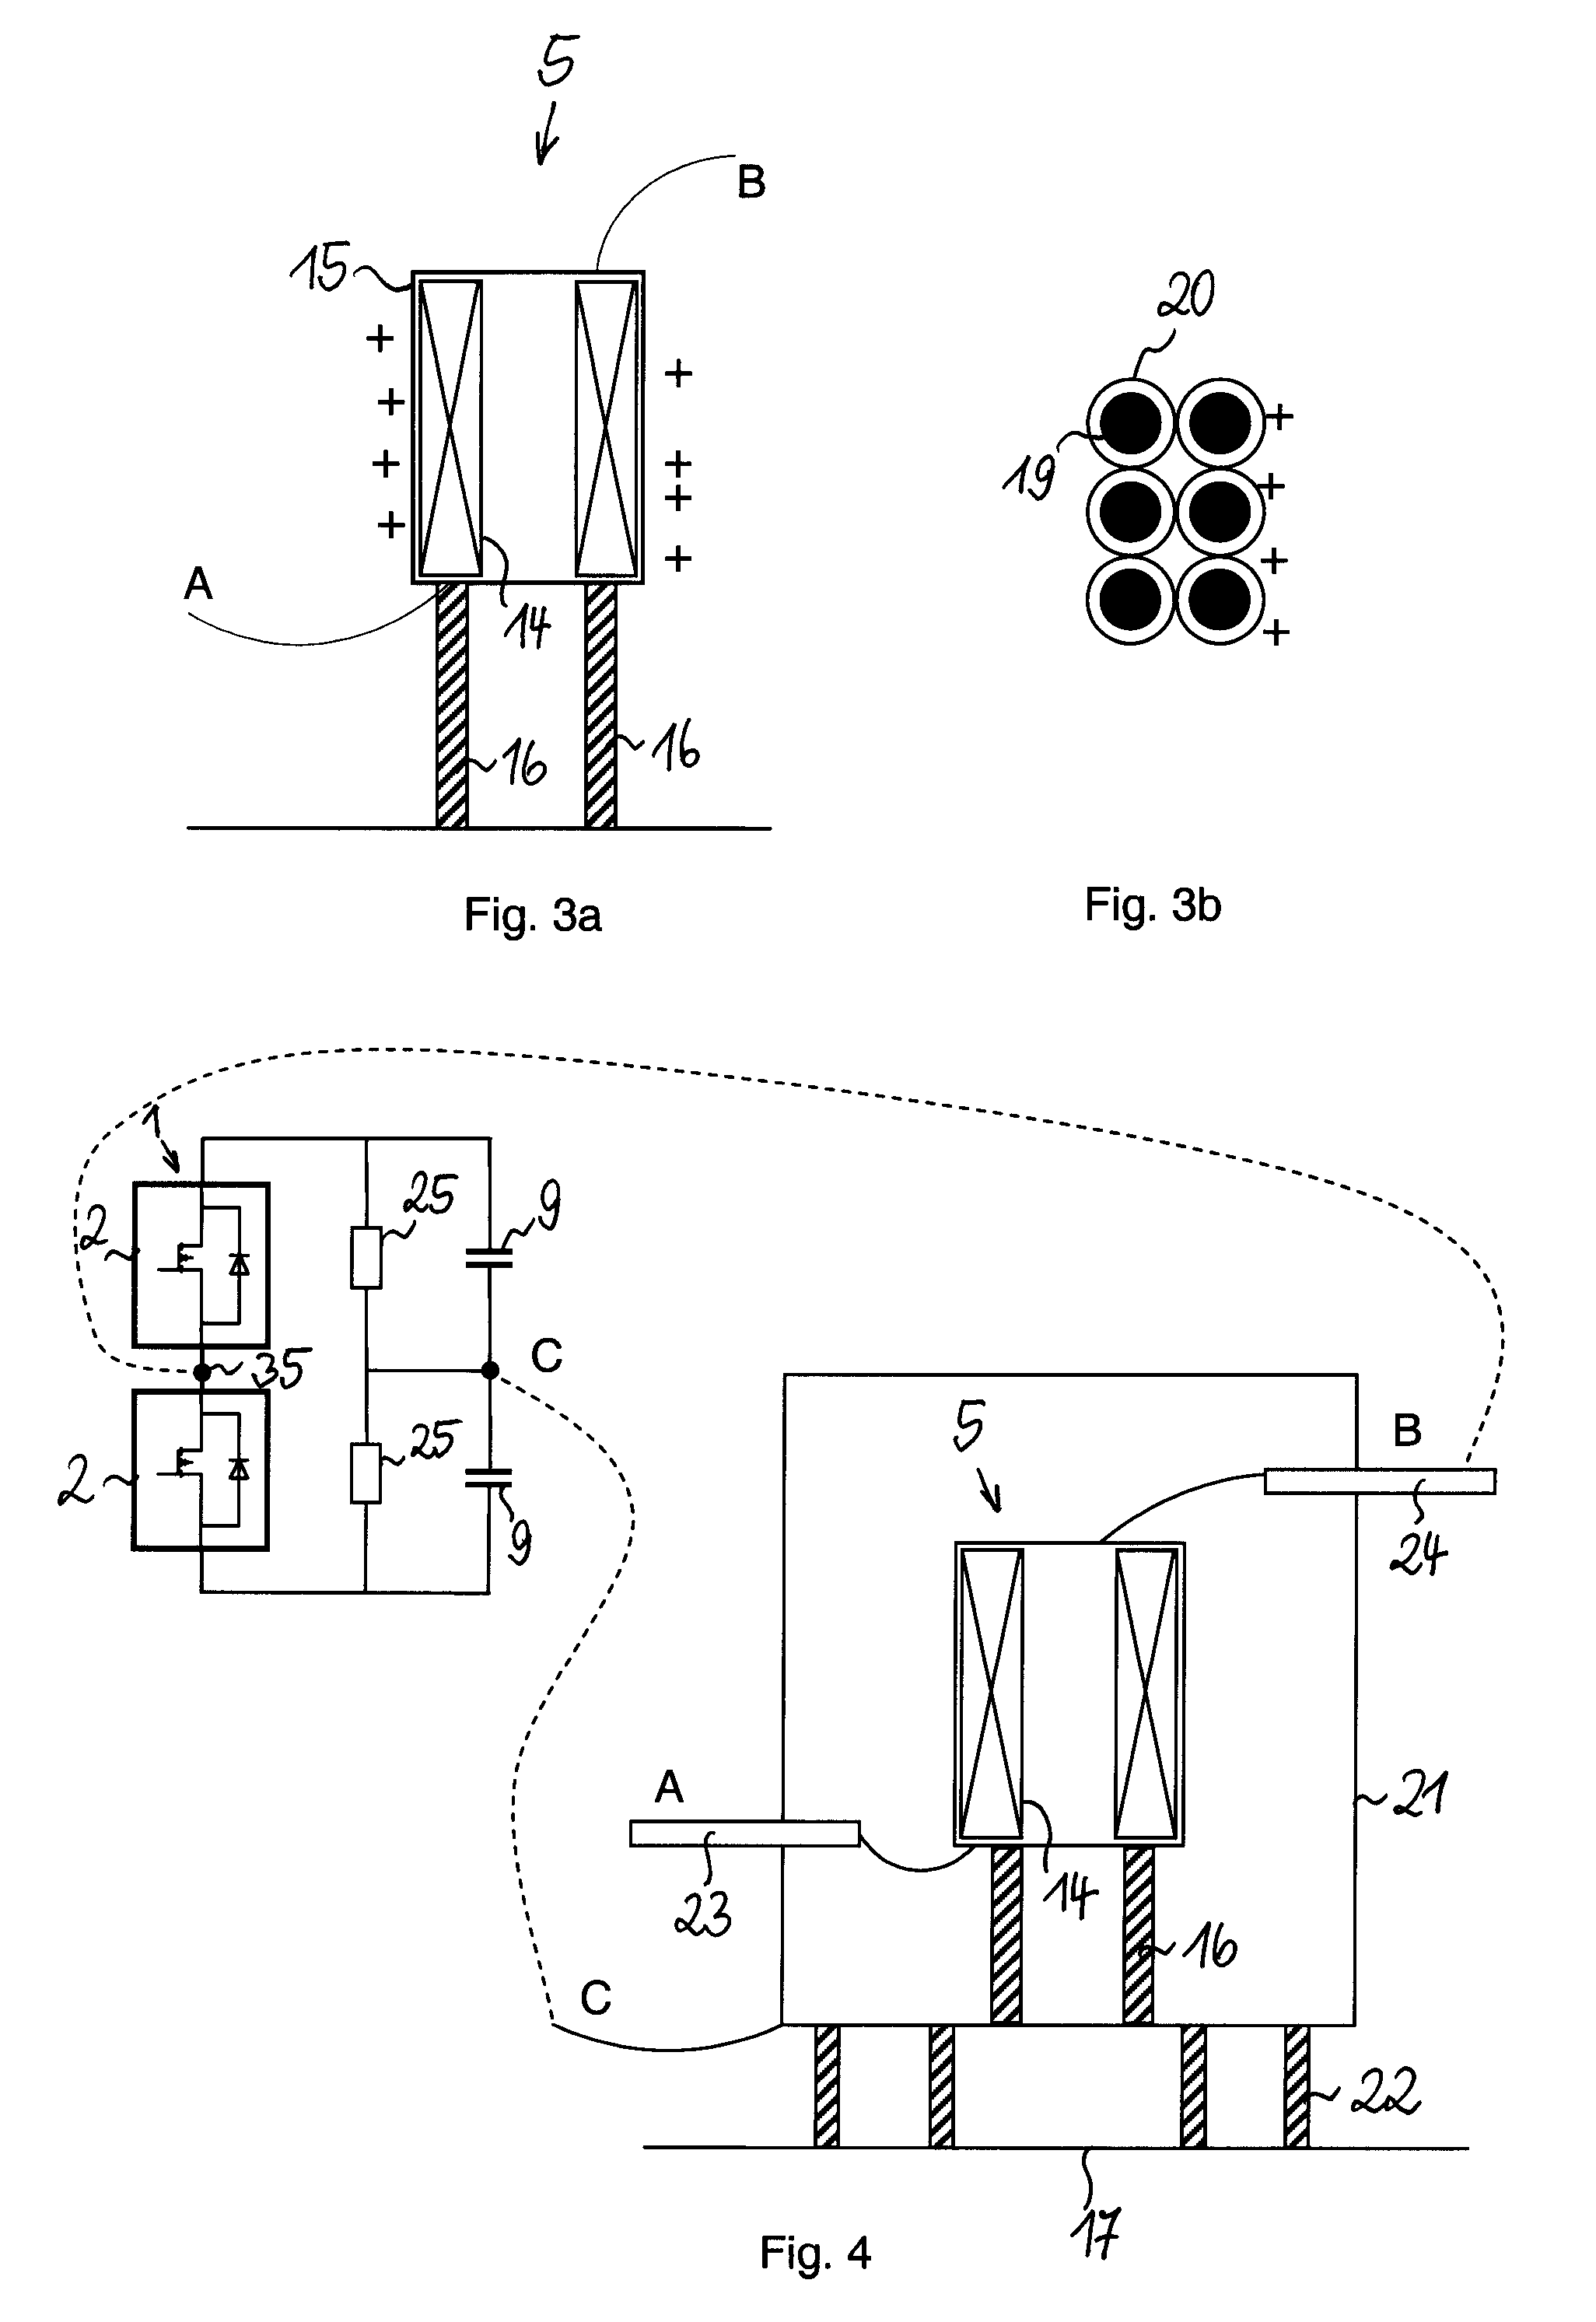 High voltage dry-type reactor for a voltage source converter